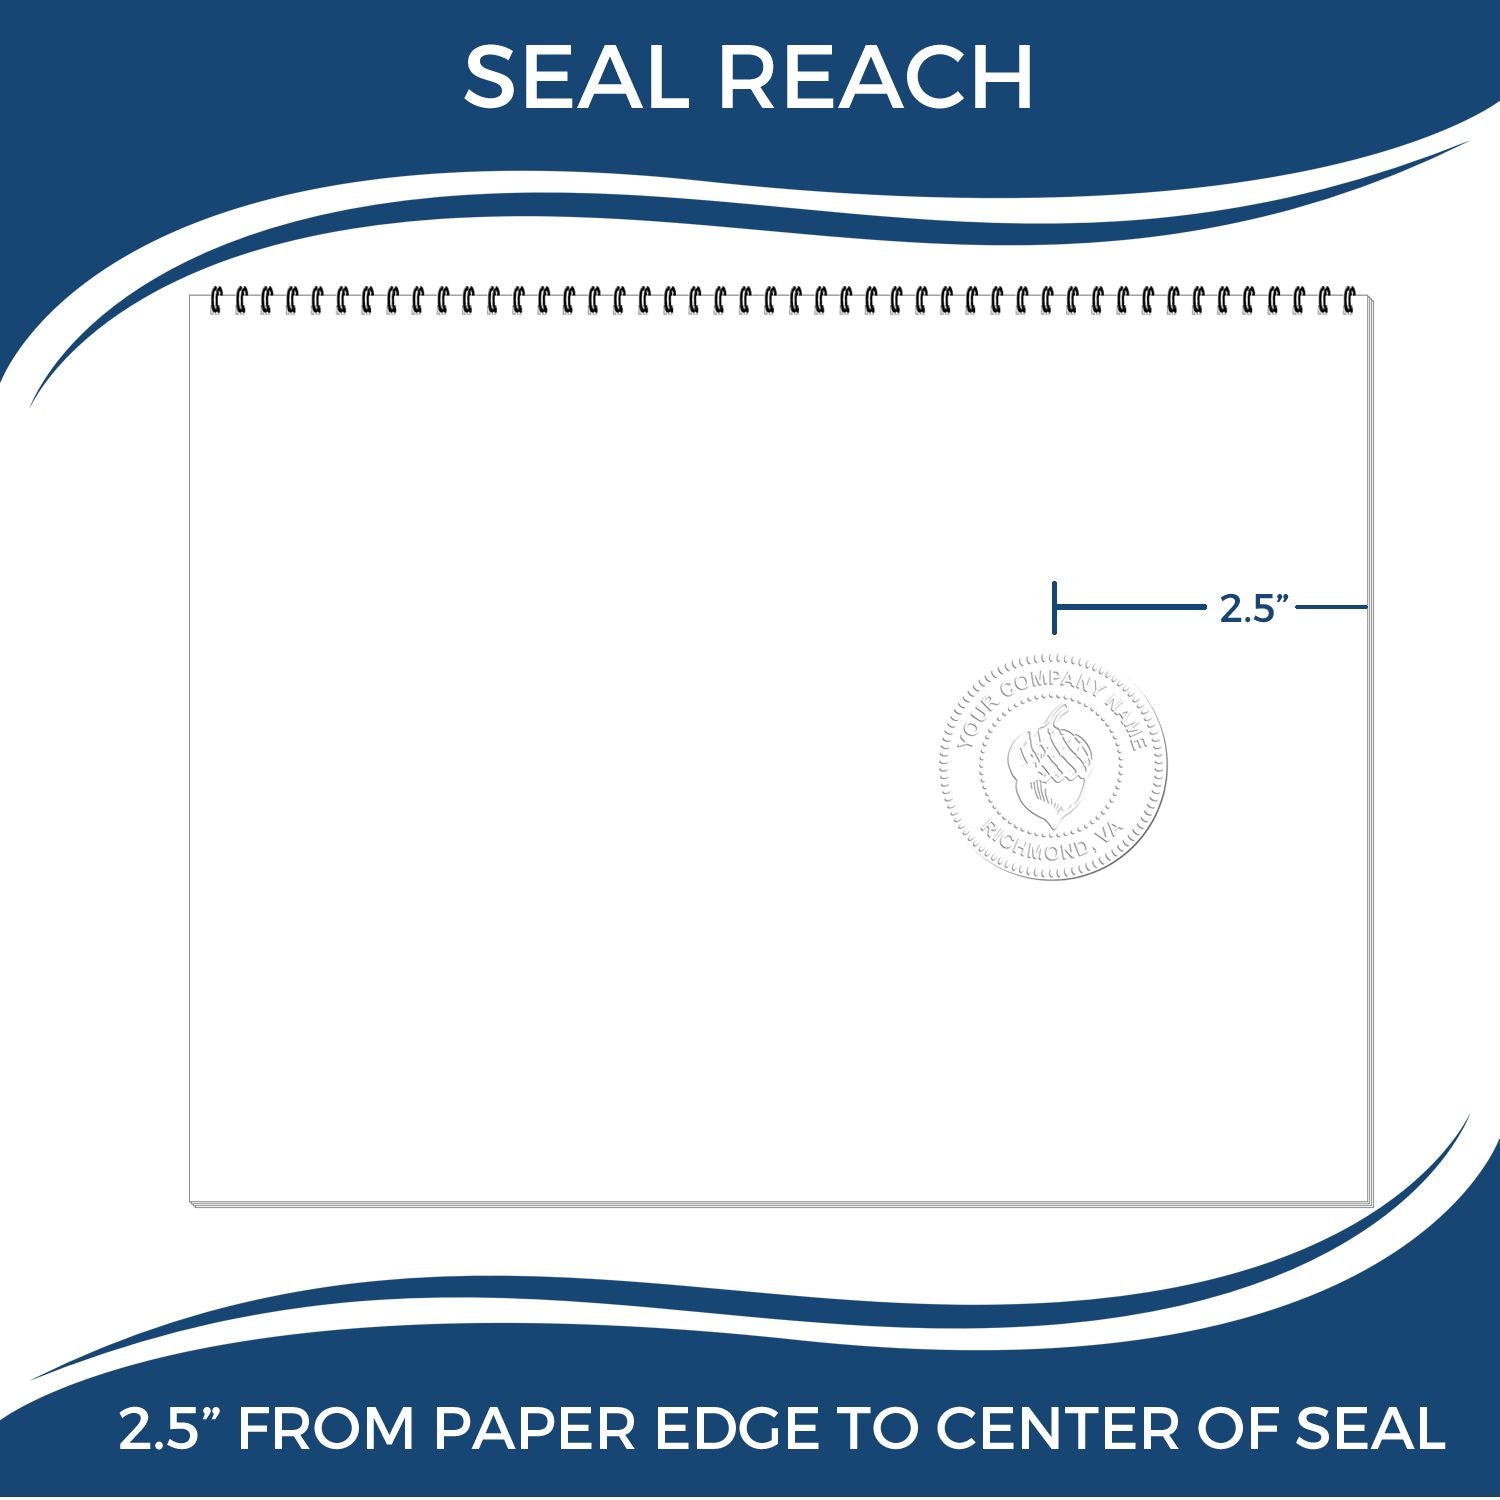 An infographic showing the seal reach which is represented by a ruler and a miniature seal image of the Heavy Duty Cast Iron New Mexico Land Surveyor Seal Embosser